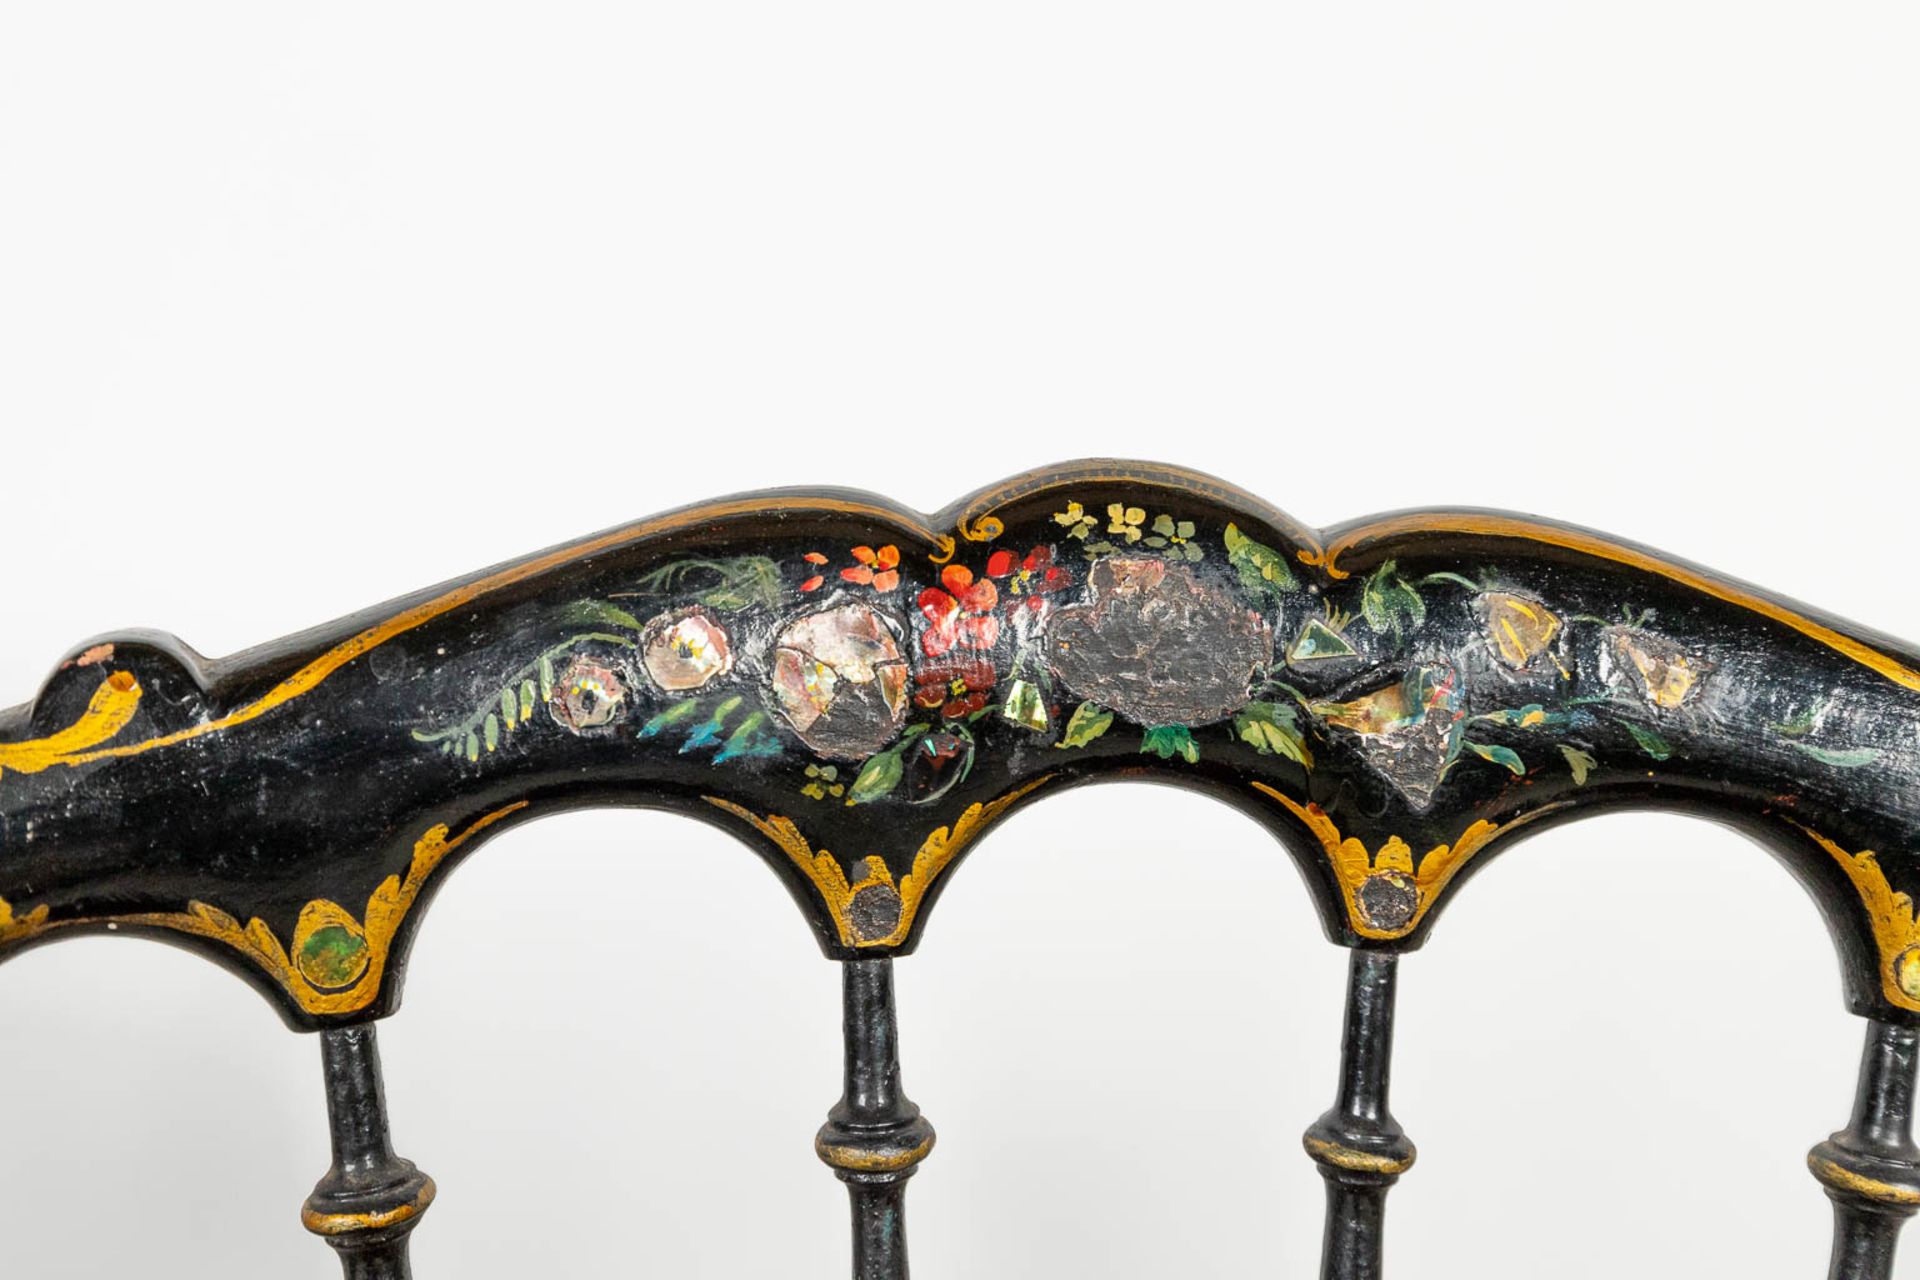 A collection of 3 chairs inlaid with mother of pearl and hand-painted decors. - Image 4 of 10